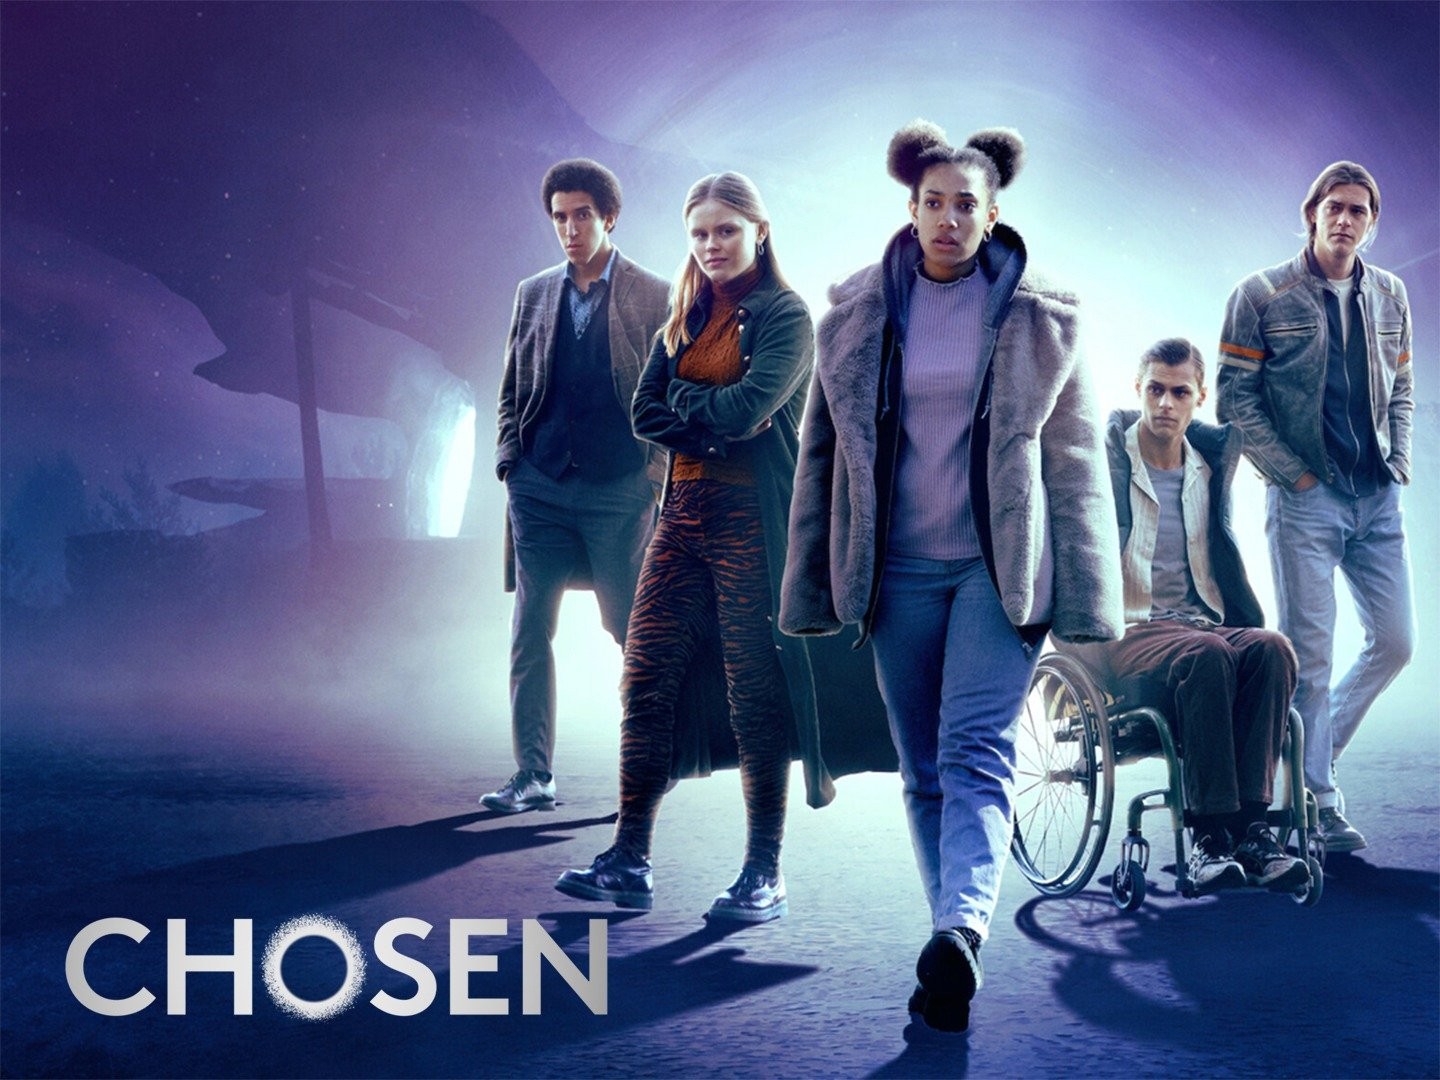 The Chosen One: Release Date, Trailer, plot & more